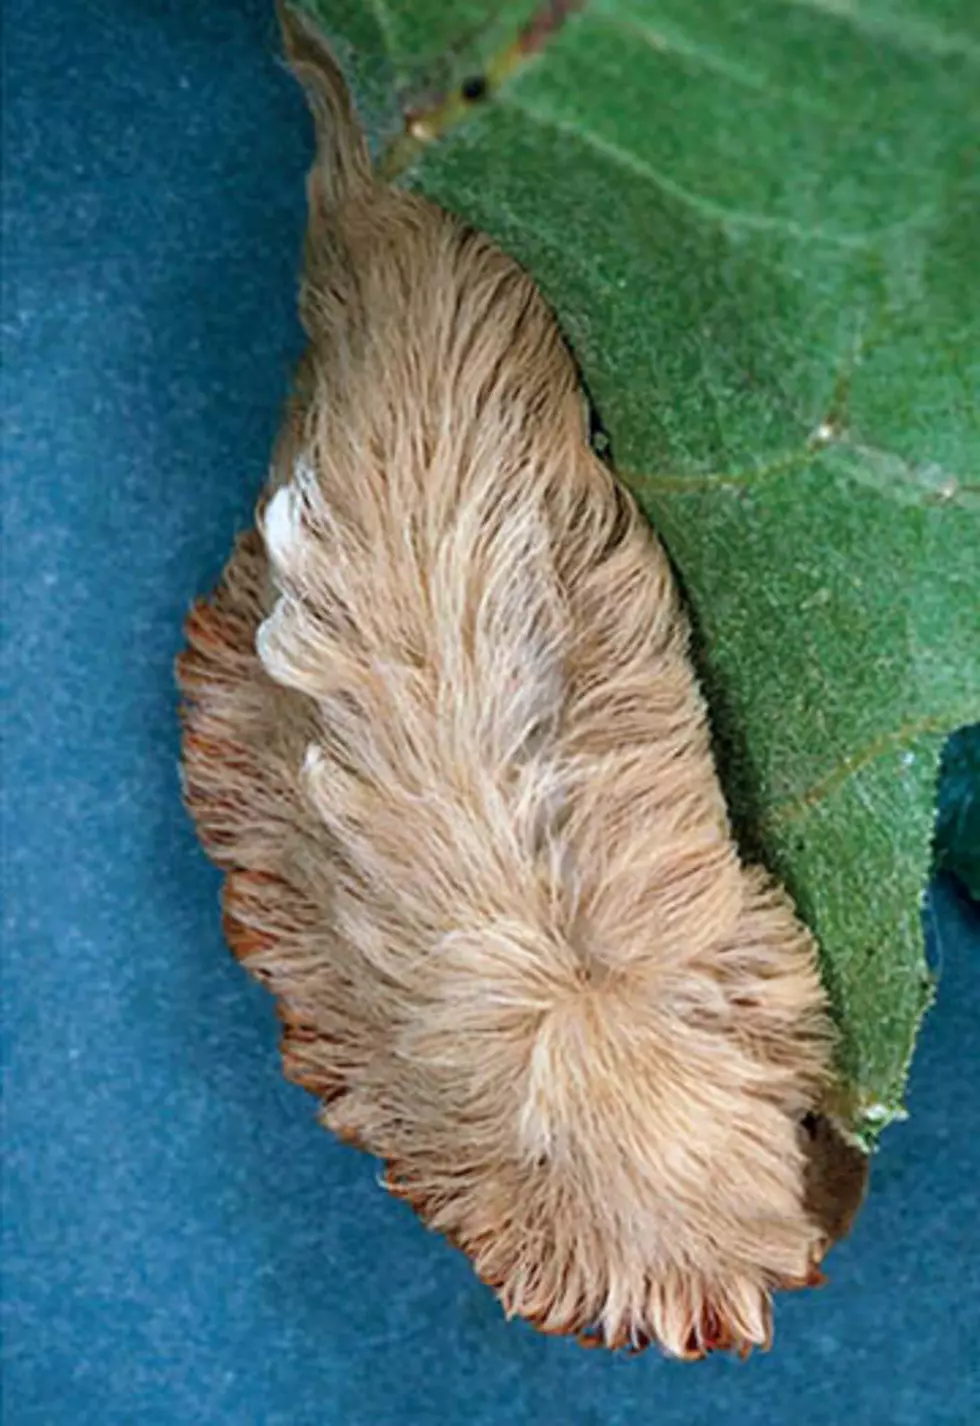 Louisiana Caterpillar “Puss Moth” is Nothing to Laugh At